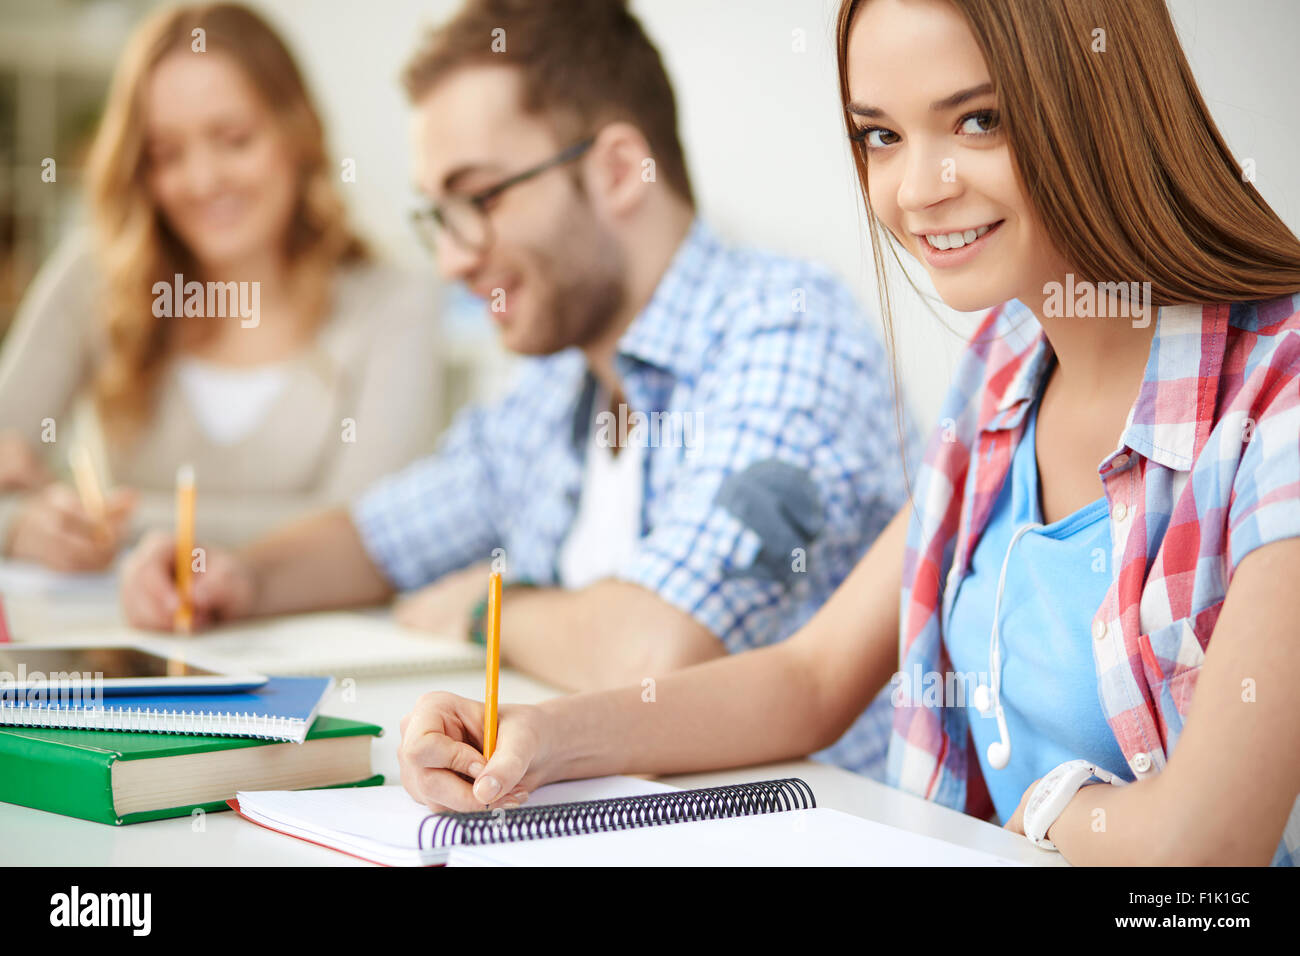 Smiling girl carrying out written task with her groupmates on background Stock Photo